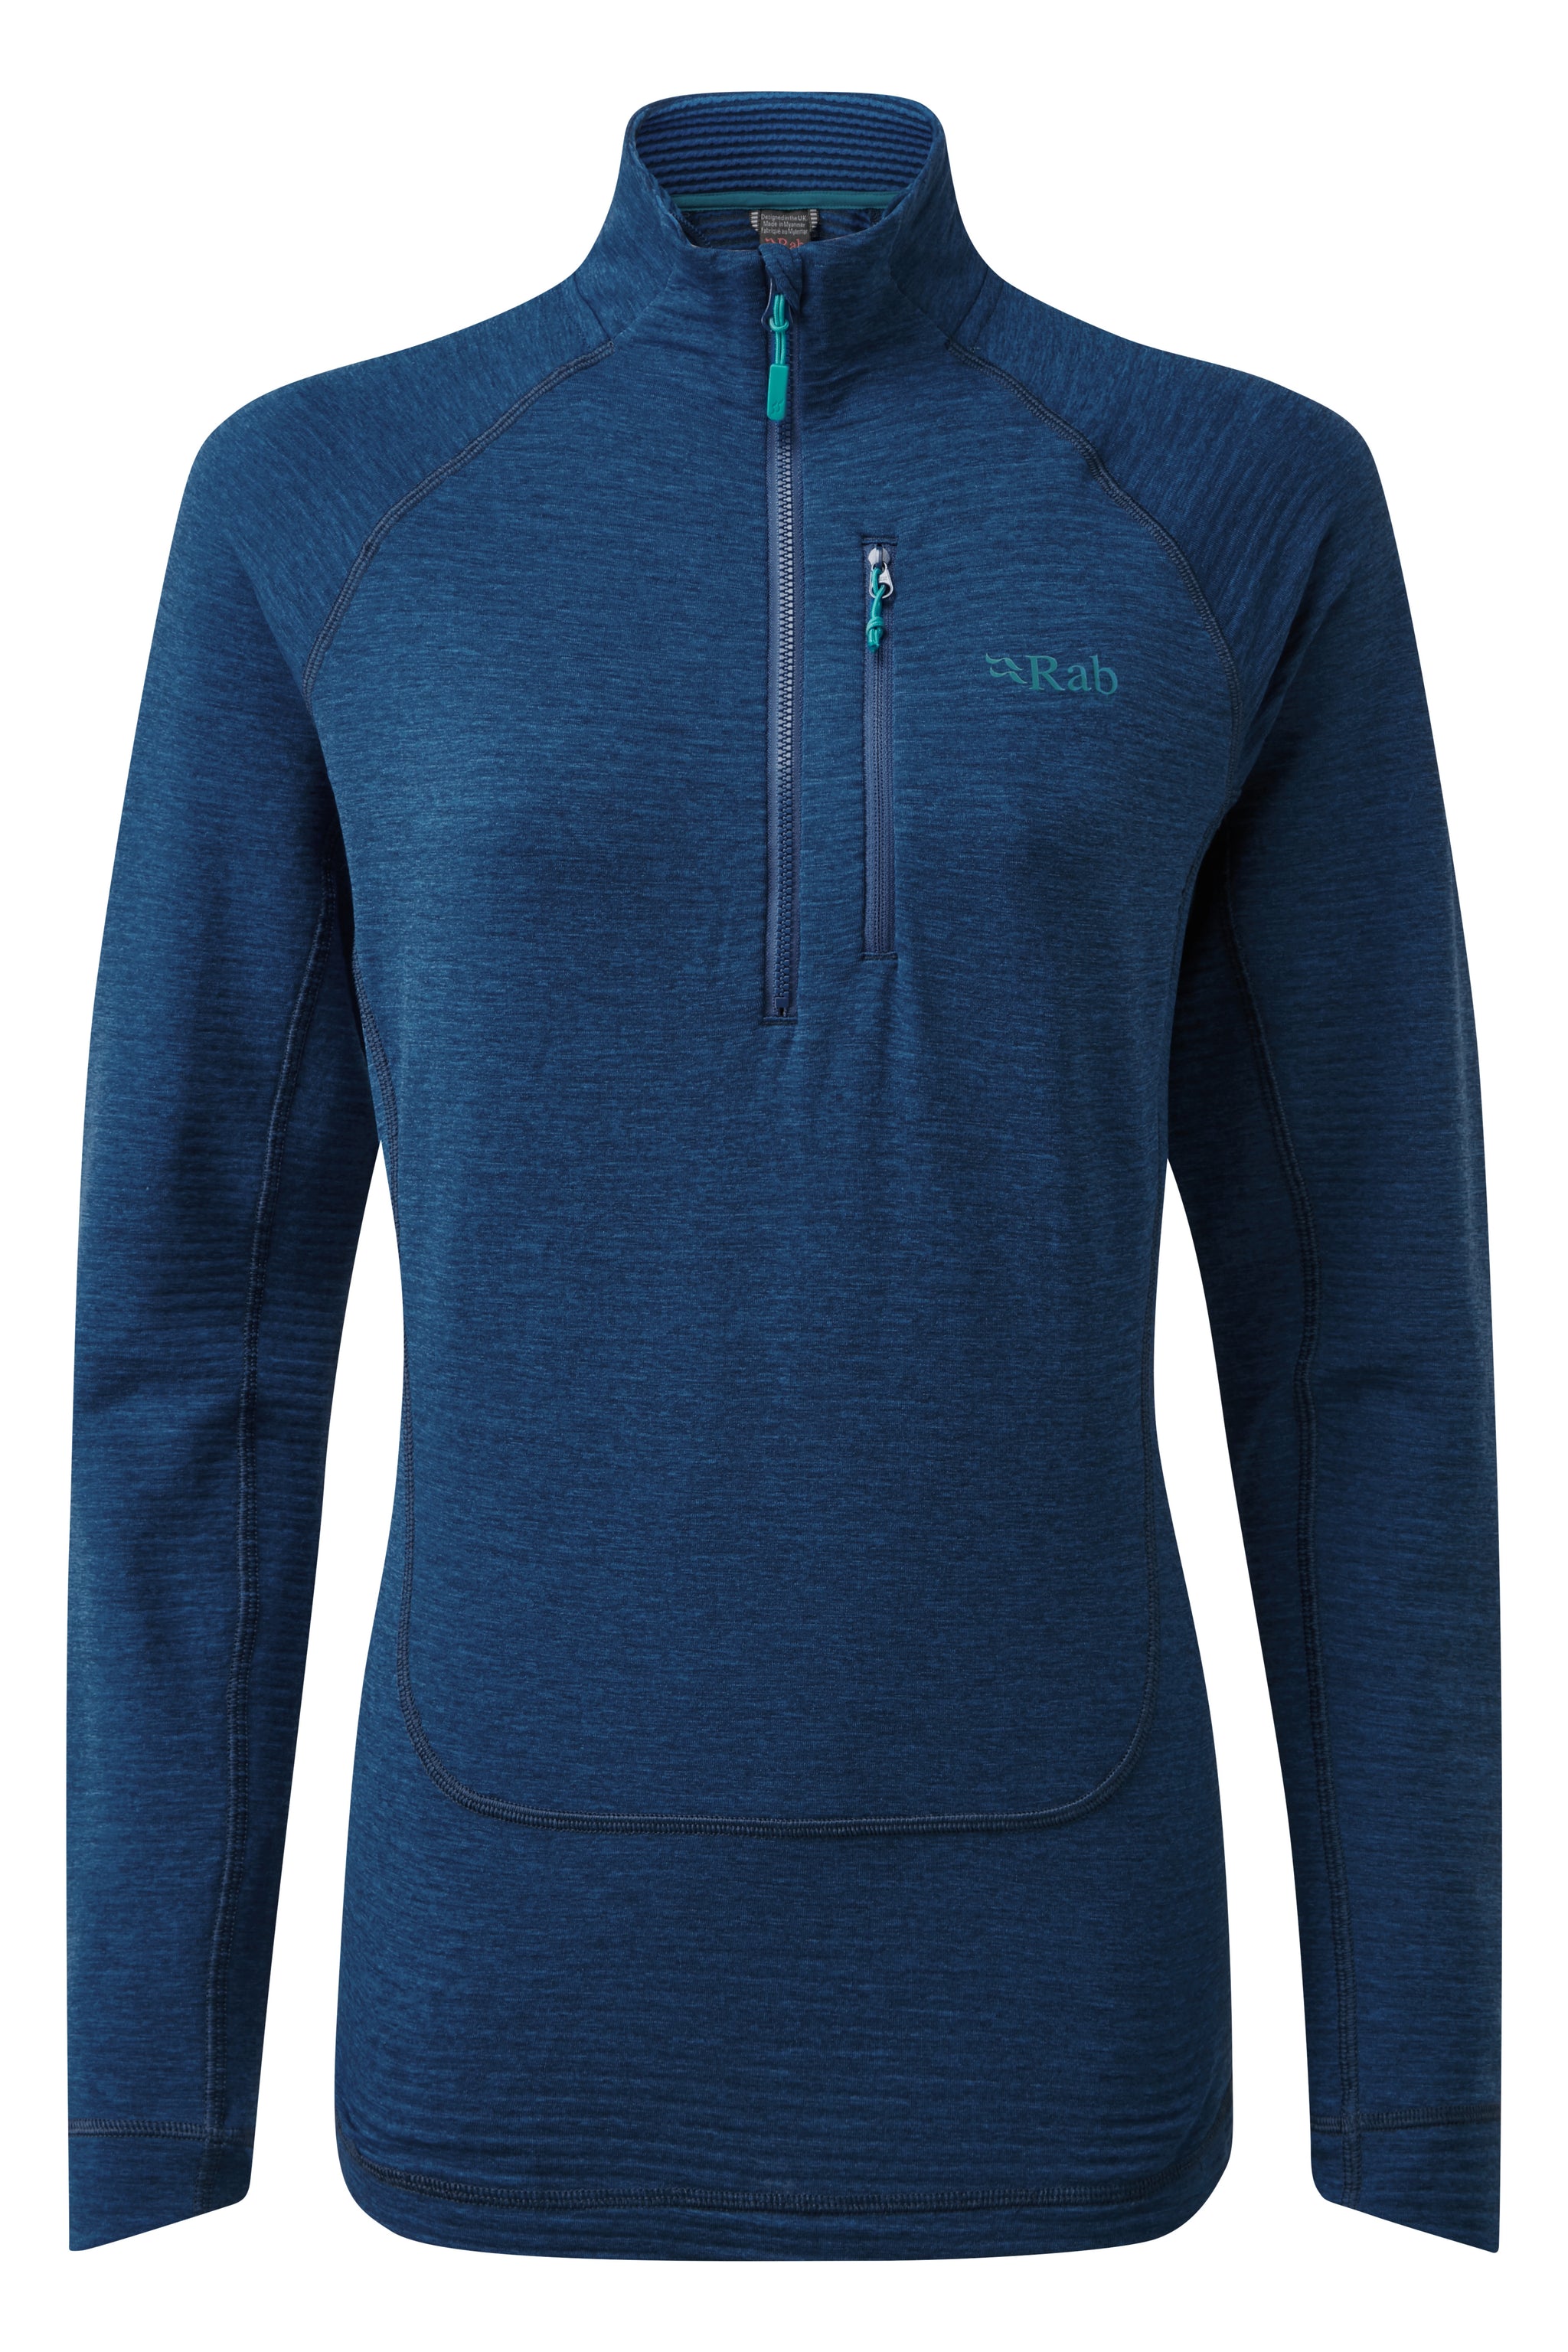 Rab Women's Filament Pull-On - outfittersstore.nz